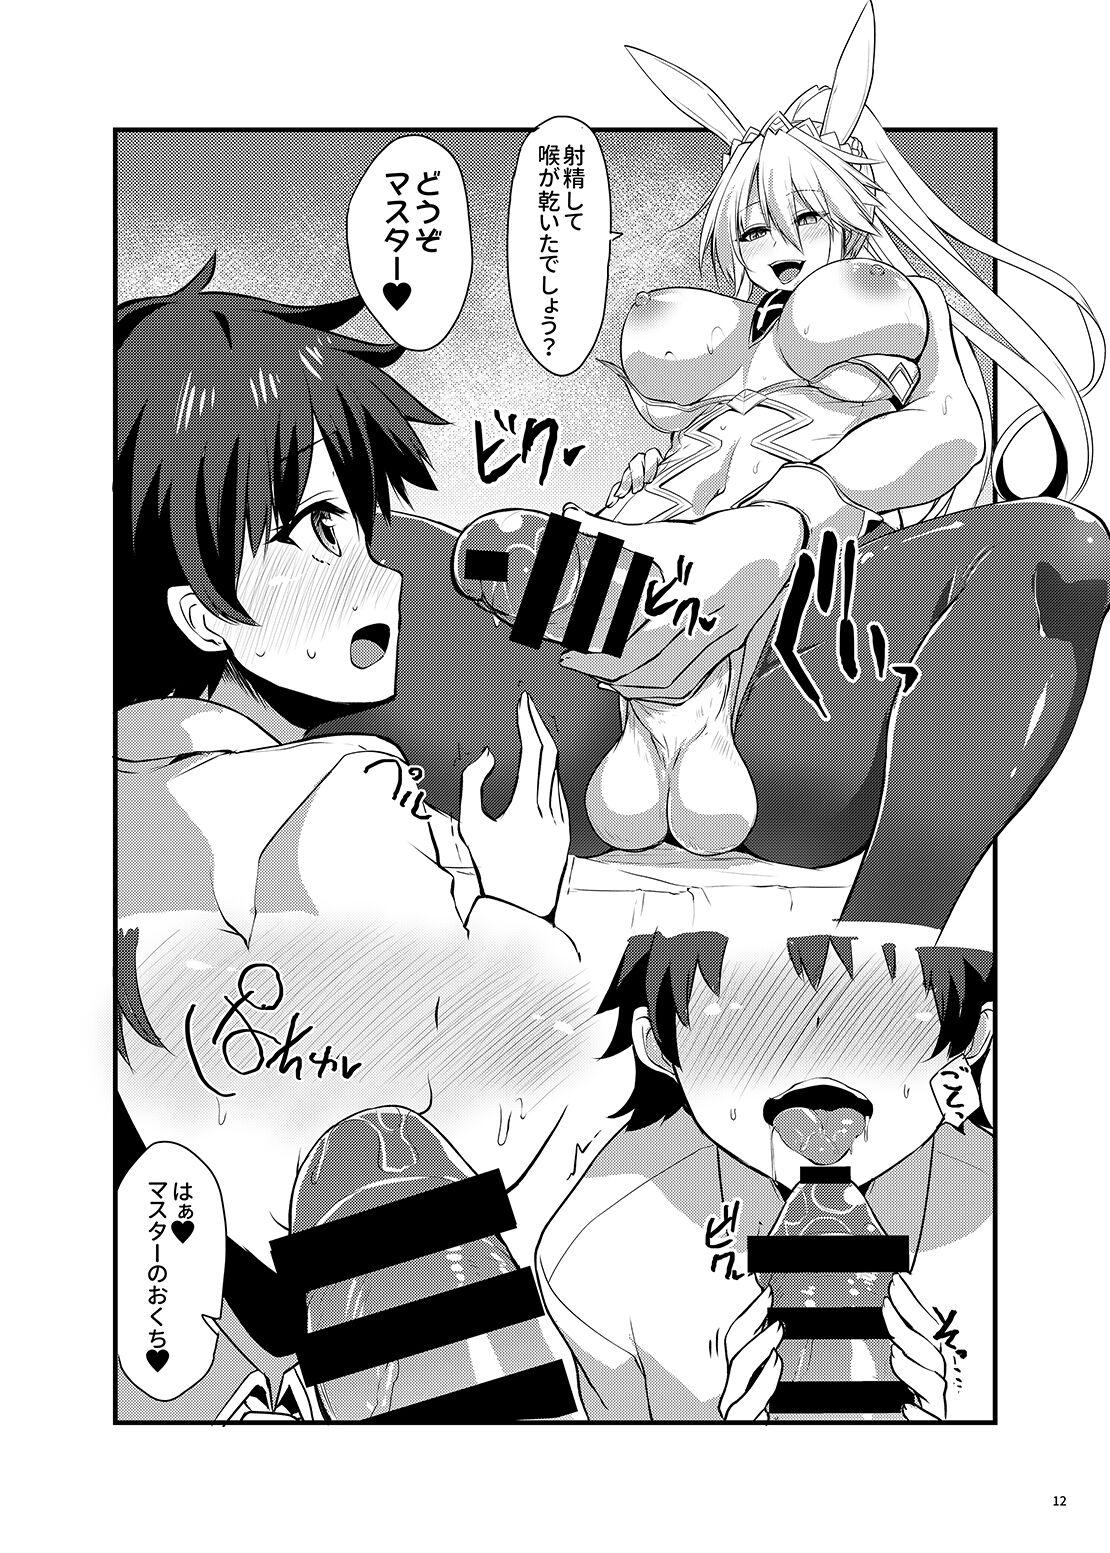 Celebrity Porn ふたなりバニ上と - Fate grand order Amature Porn - Page 11